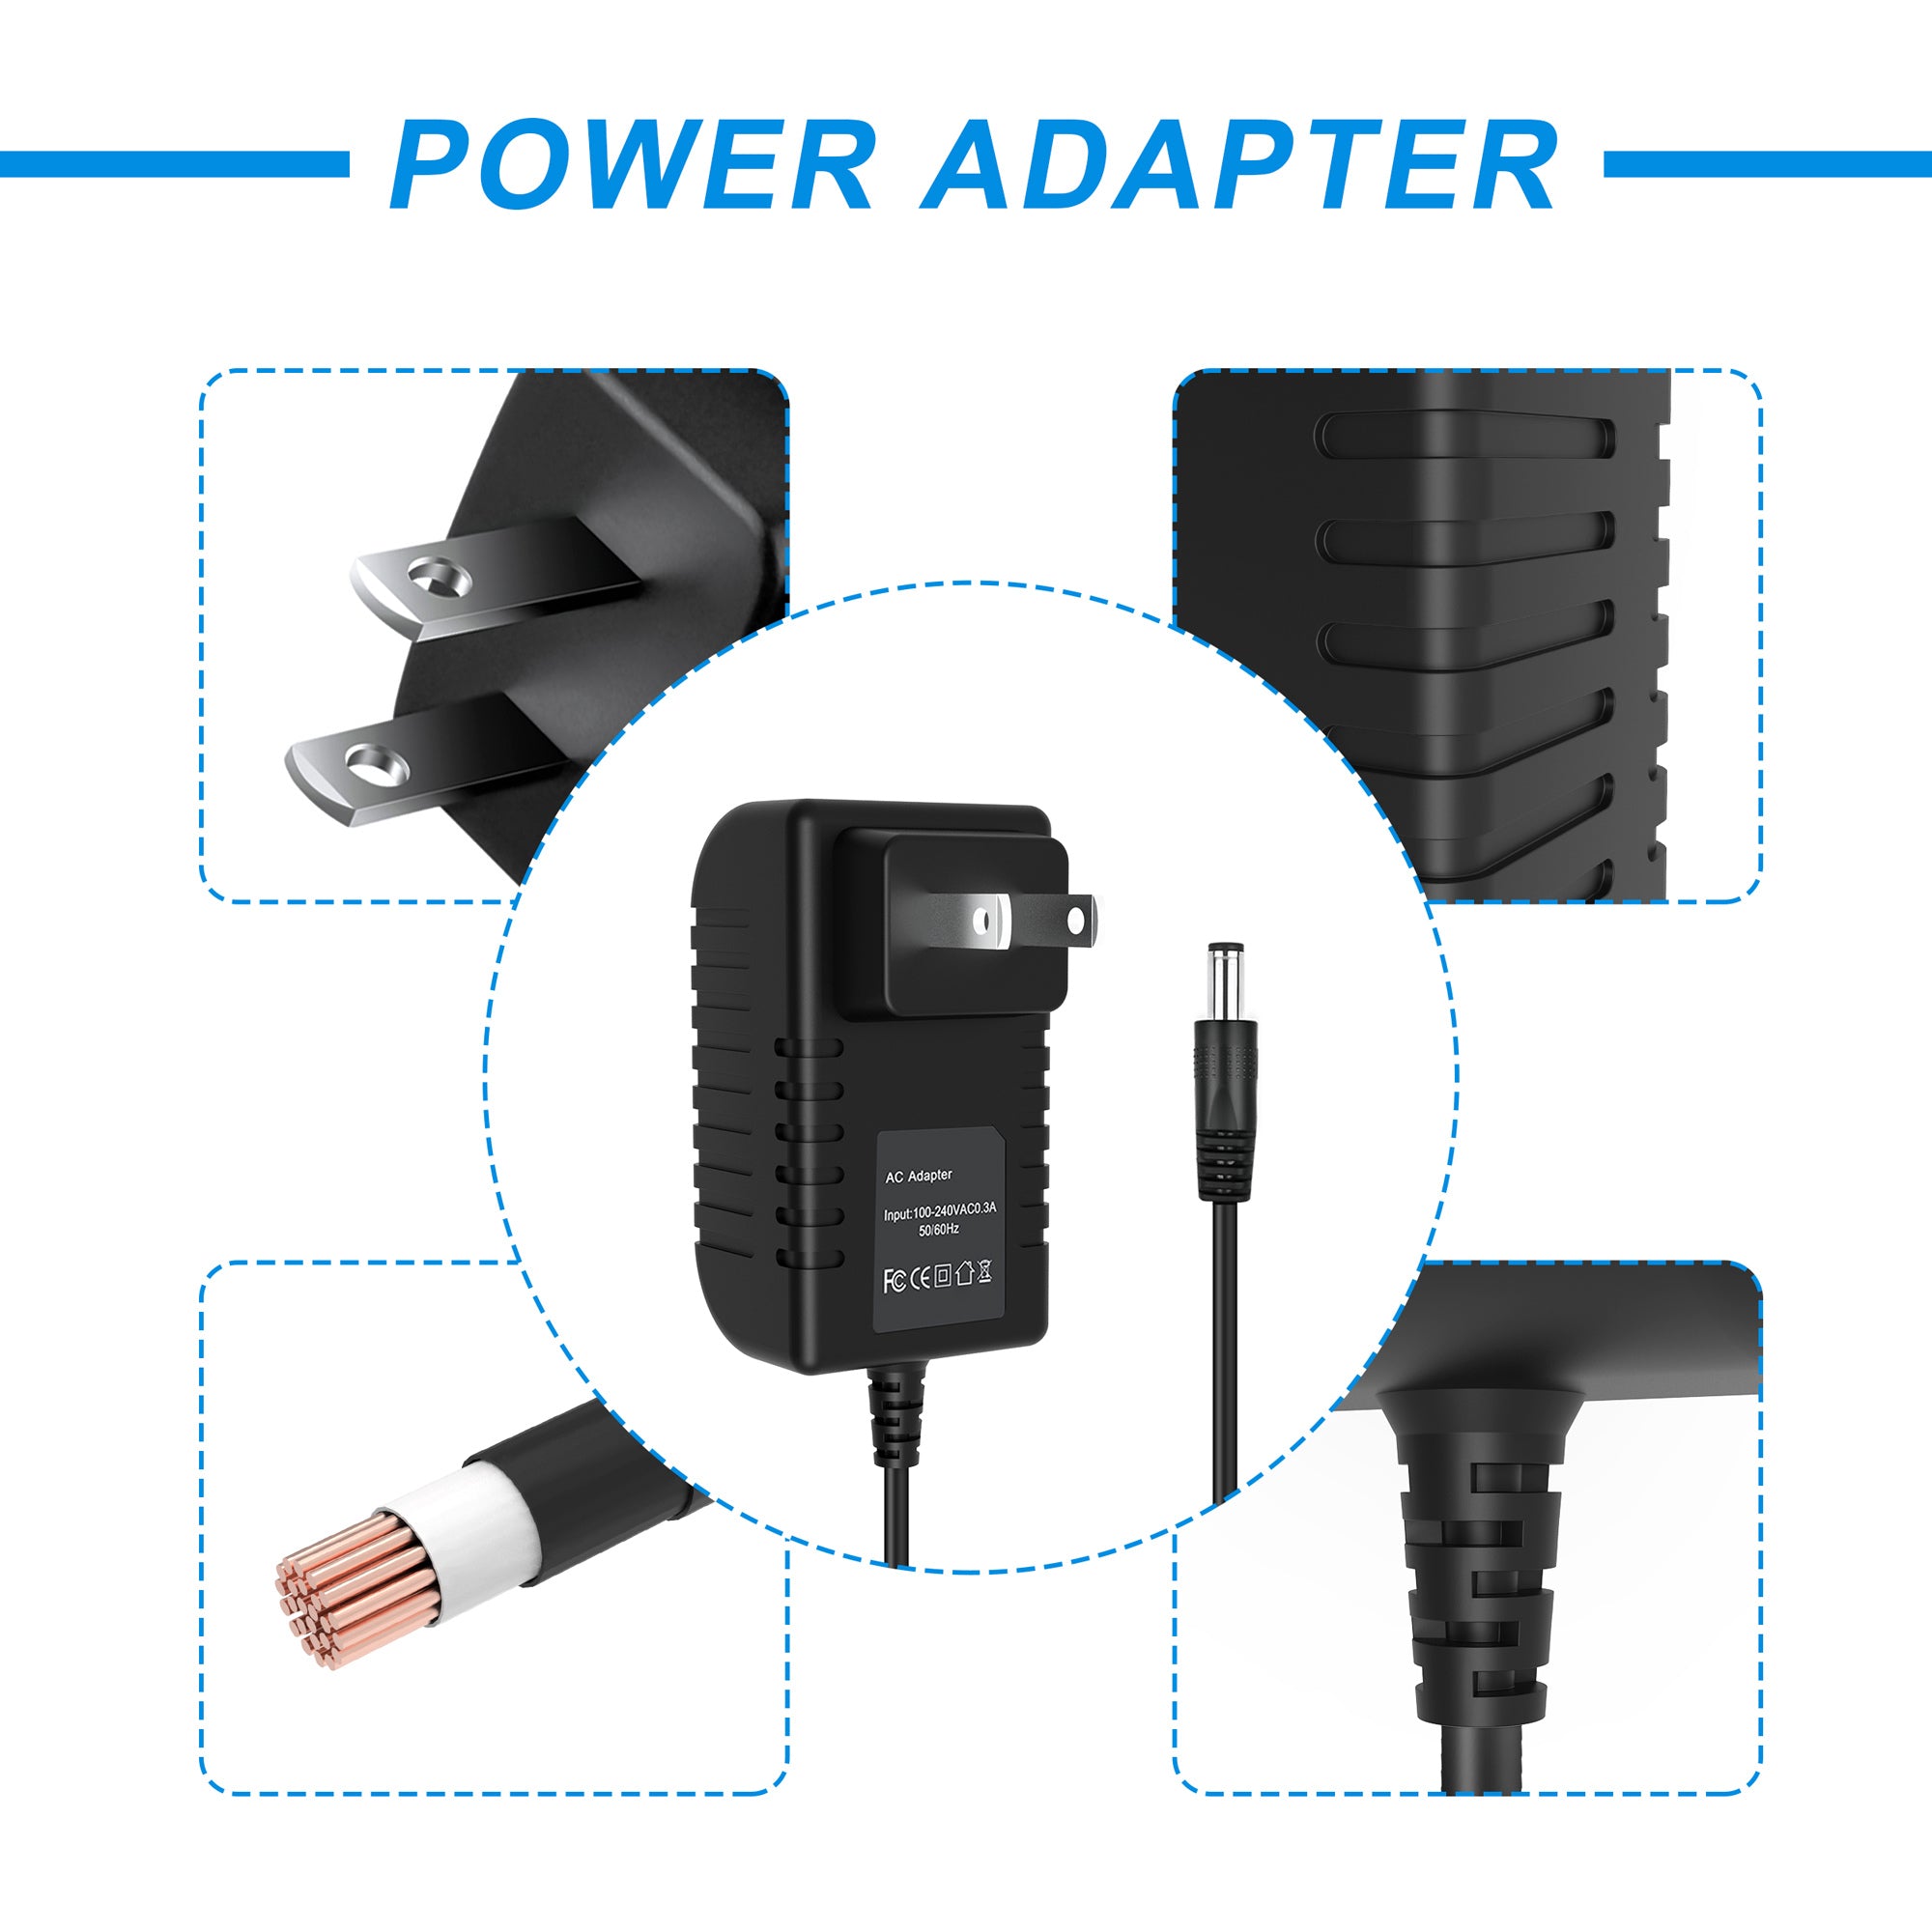 AbleGrid AC/DC Adapter Compatible with Roland Gaia SH-01 Synthesizer MT-120s Sequencer BOSS Power Supply Cord Cable PS Wall Home Input: 100 - 240 VAC 50/60Hz Worldwide Voltage Use Mains PSU